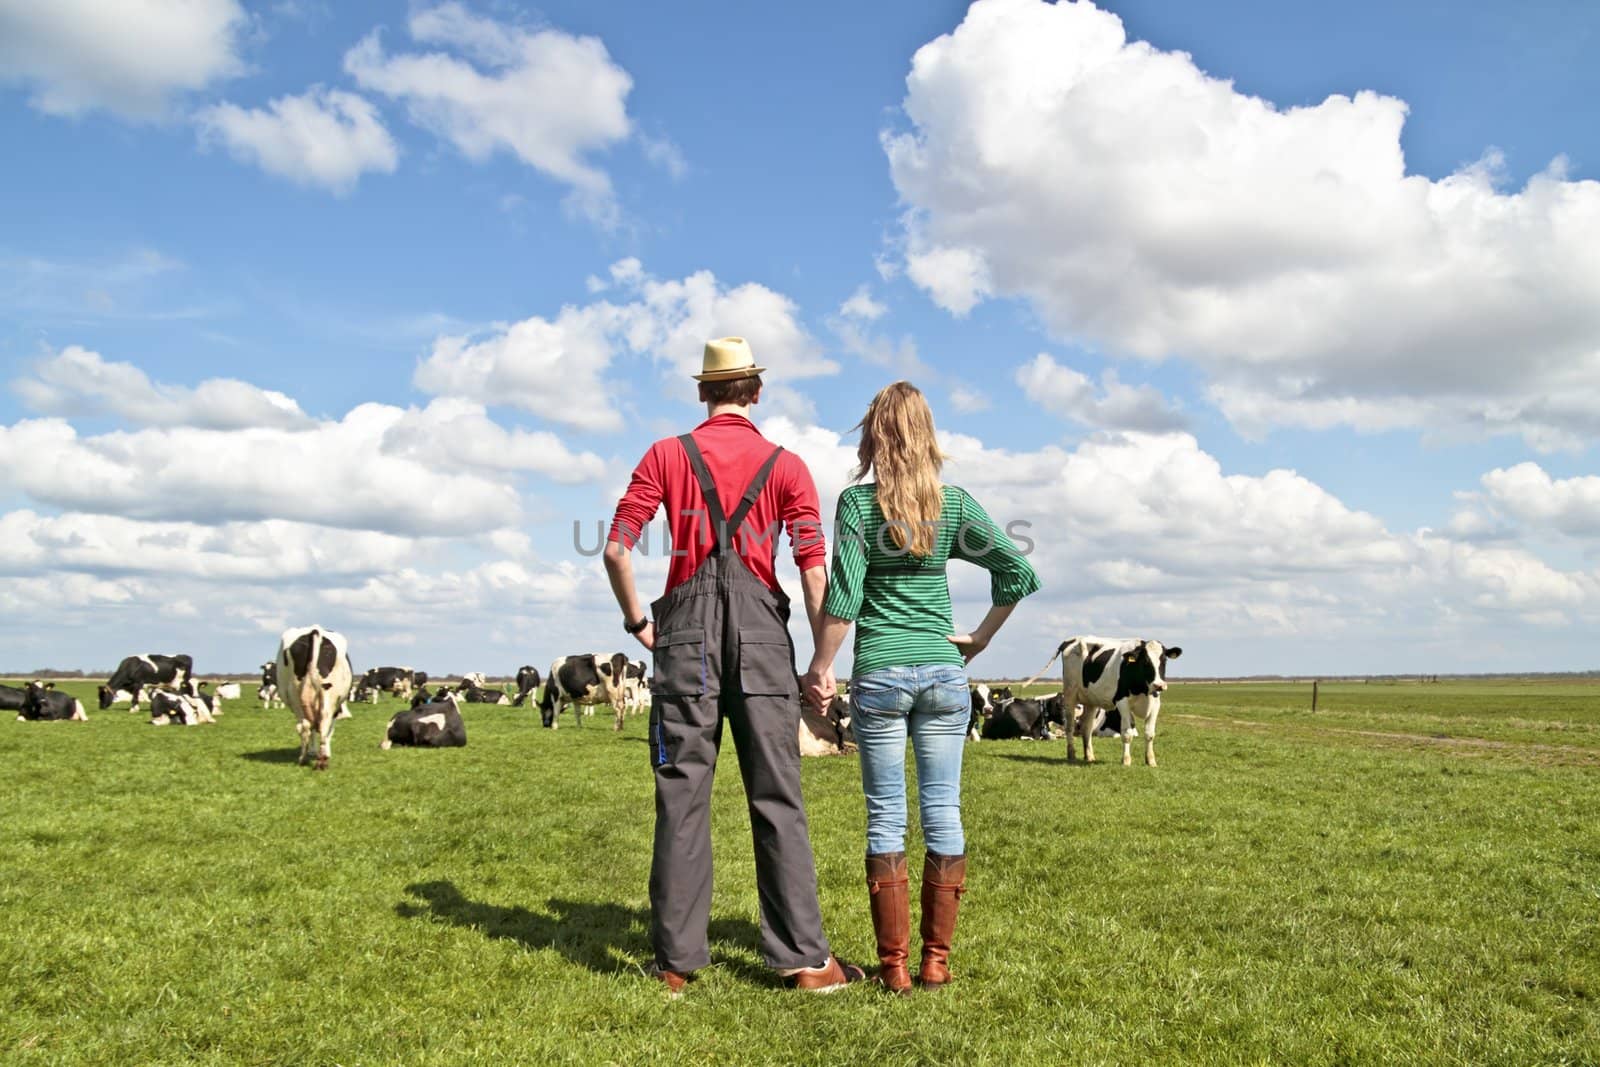 The farmer and his wife proudly looking at their cows in the countryside from the Netherlands